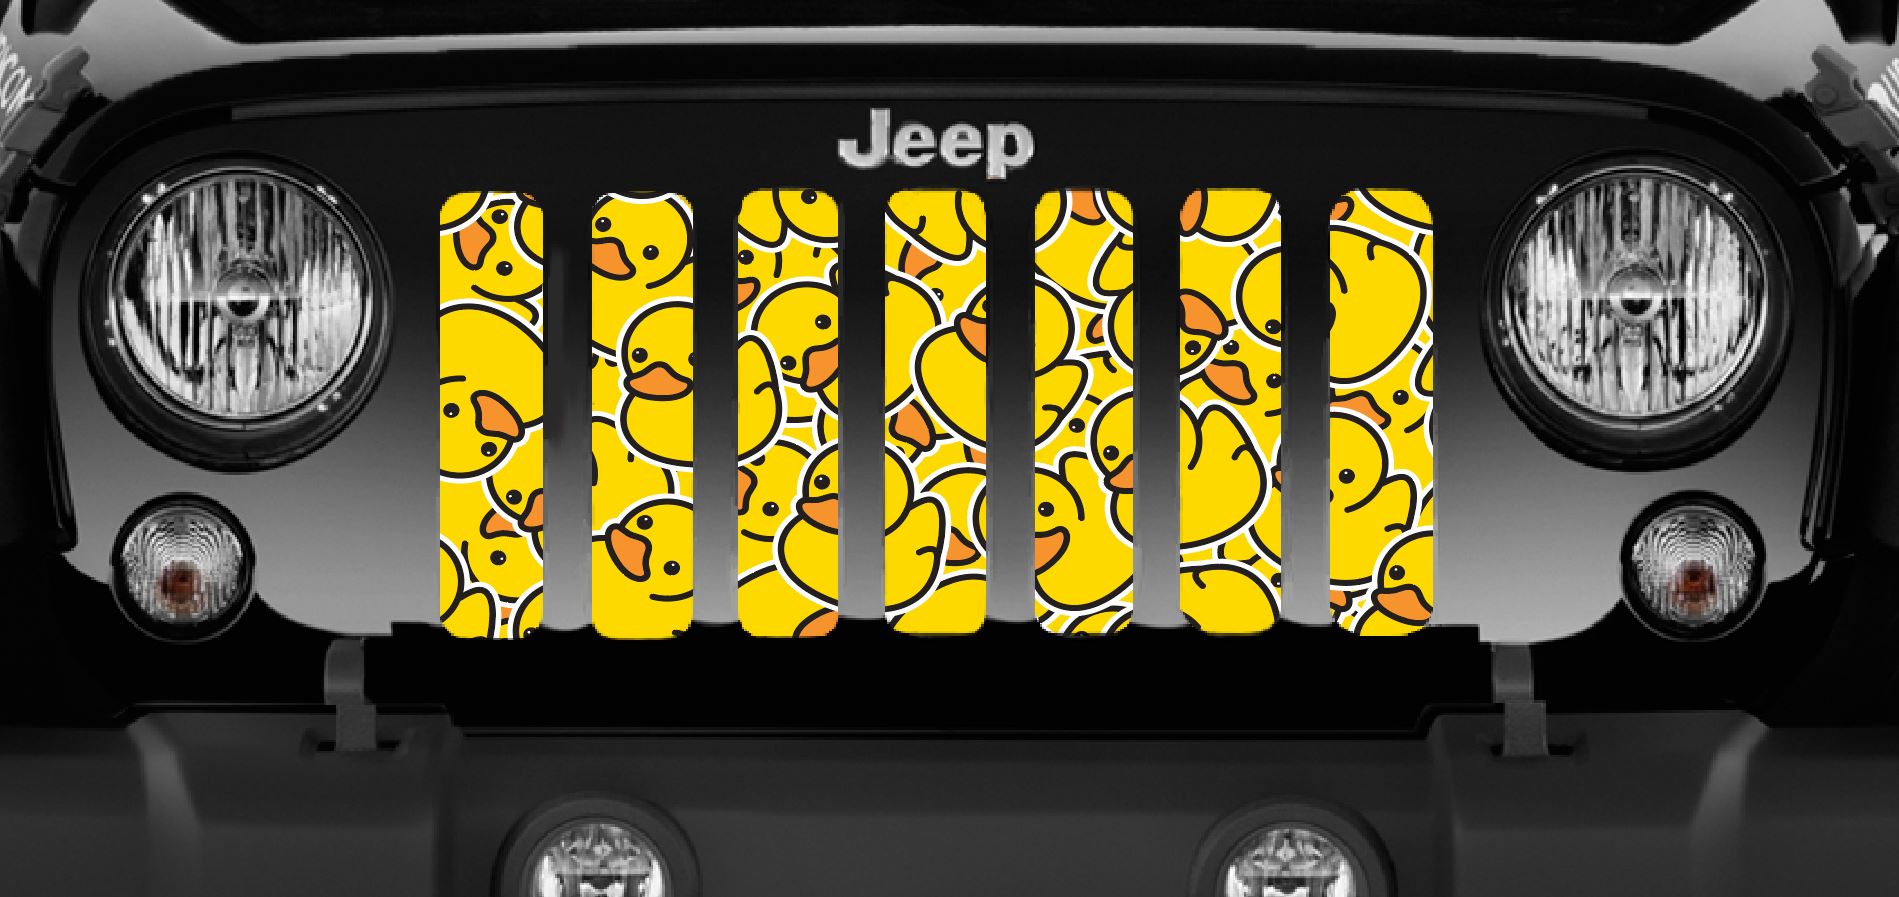 Rubber Ducks Jeep Grille Insert | Dirty Acres